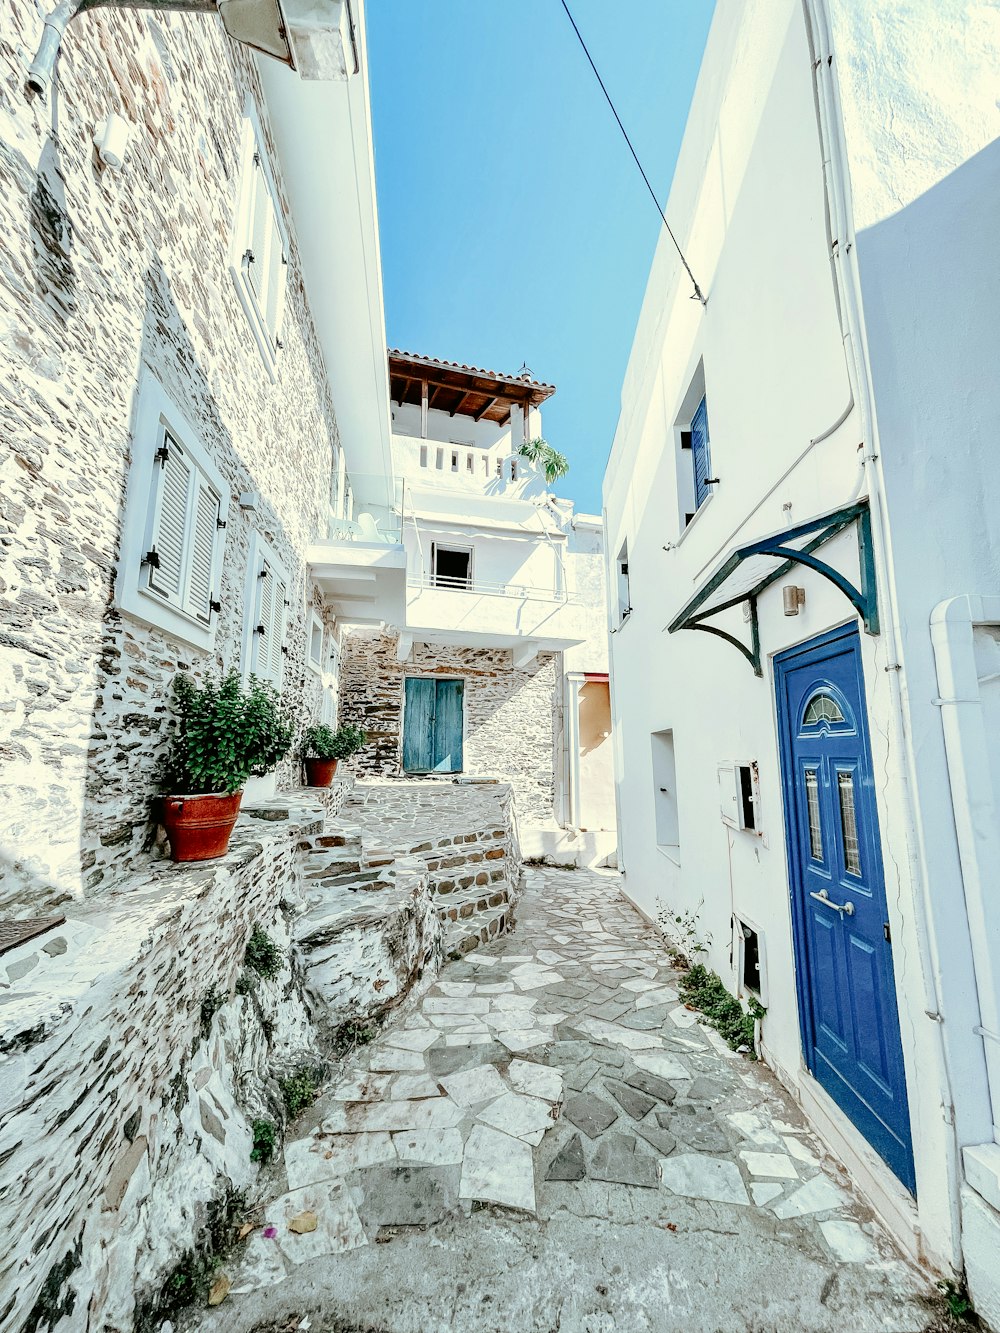 a cobblestone street with a blue door and window